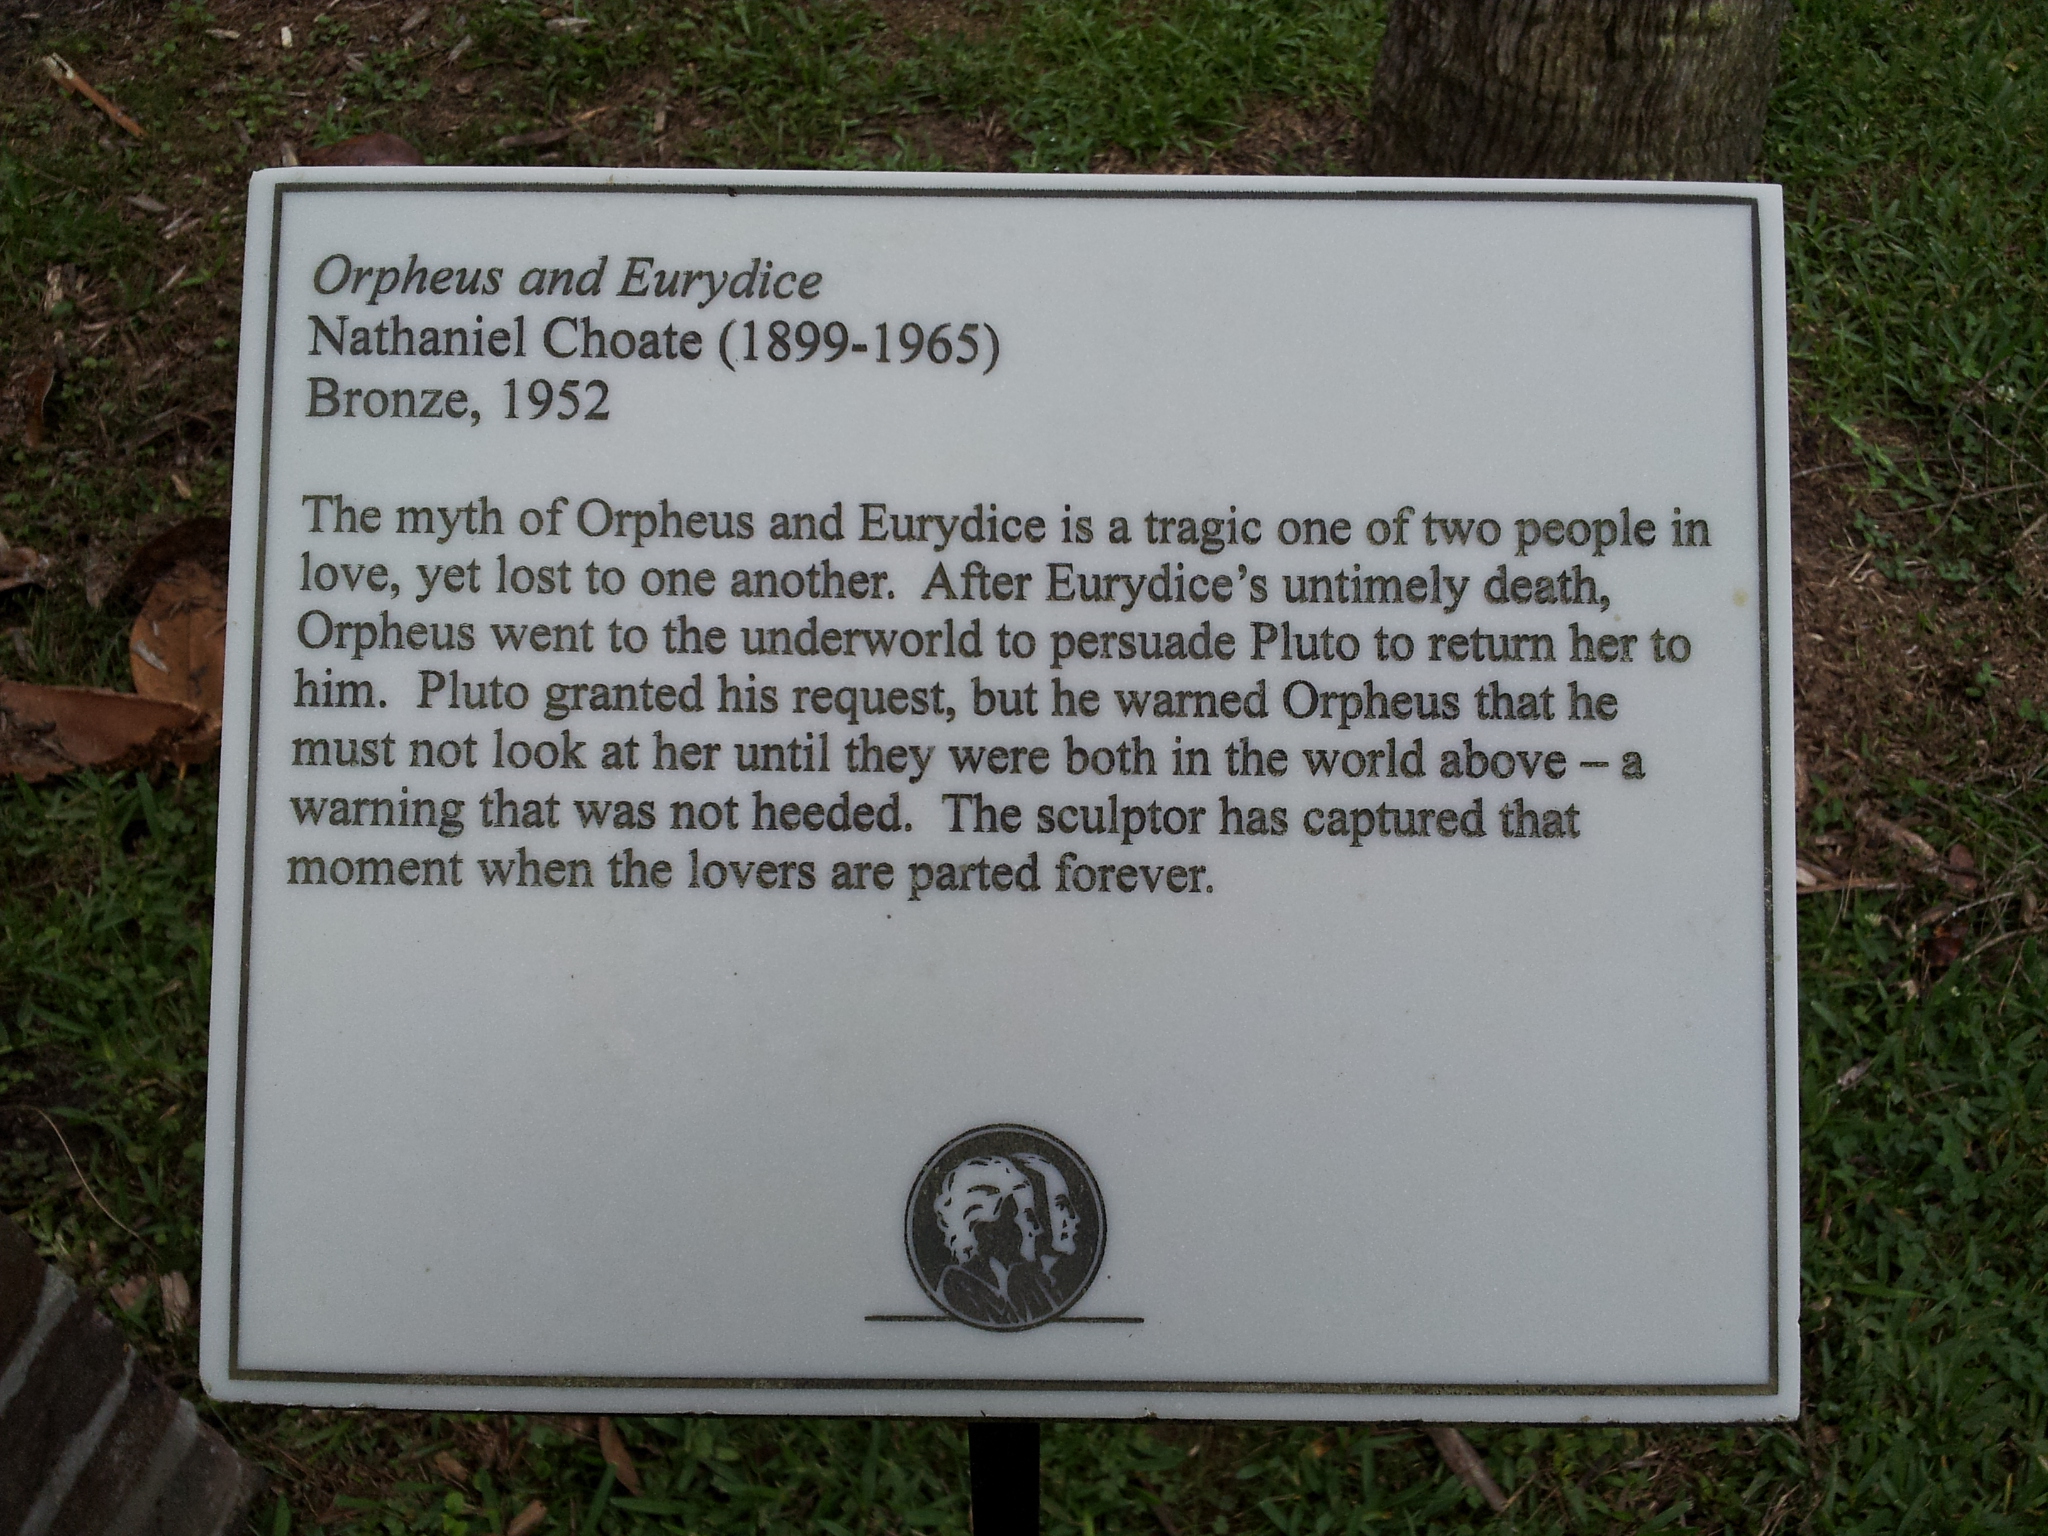 Orpheus and Eurydice by Nathaniel Choate (plaque)